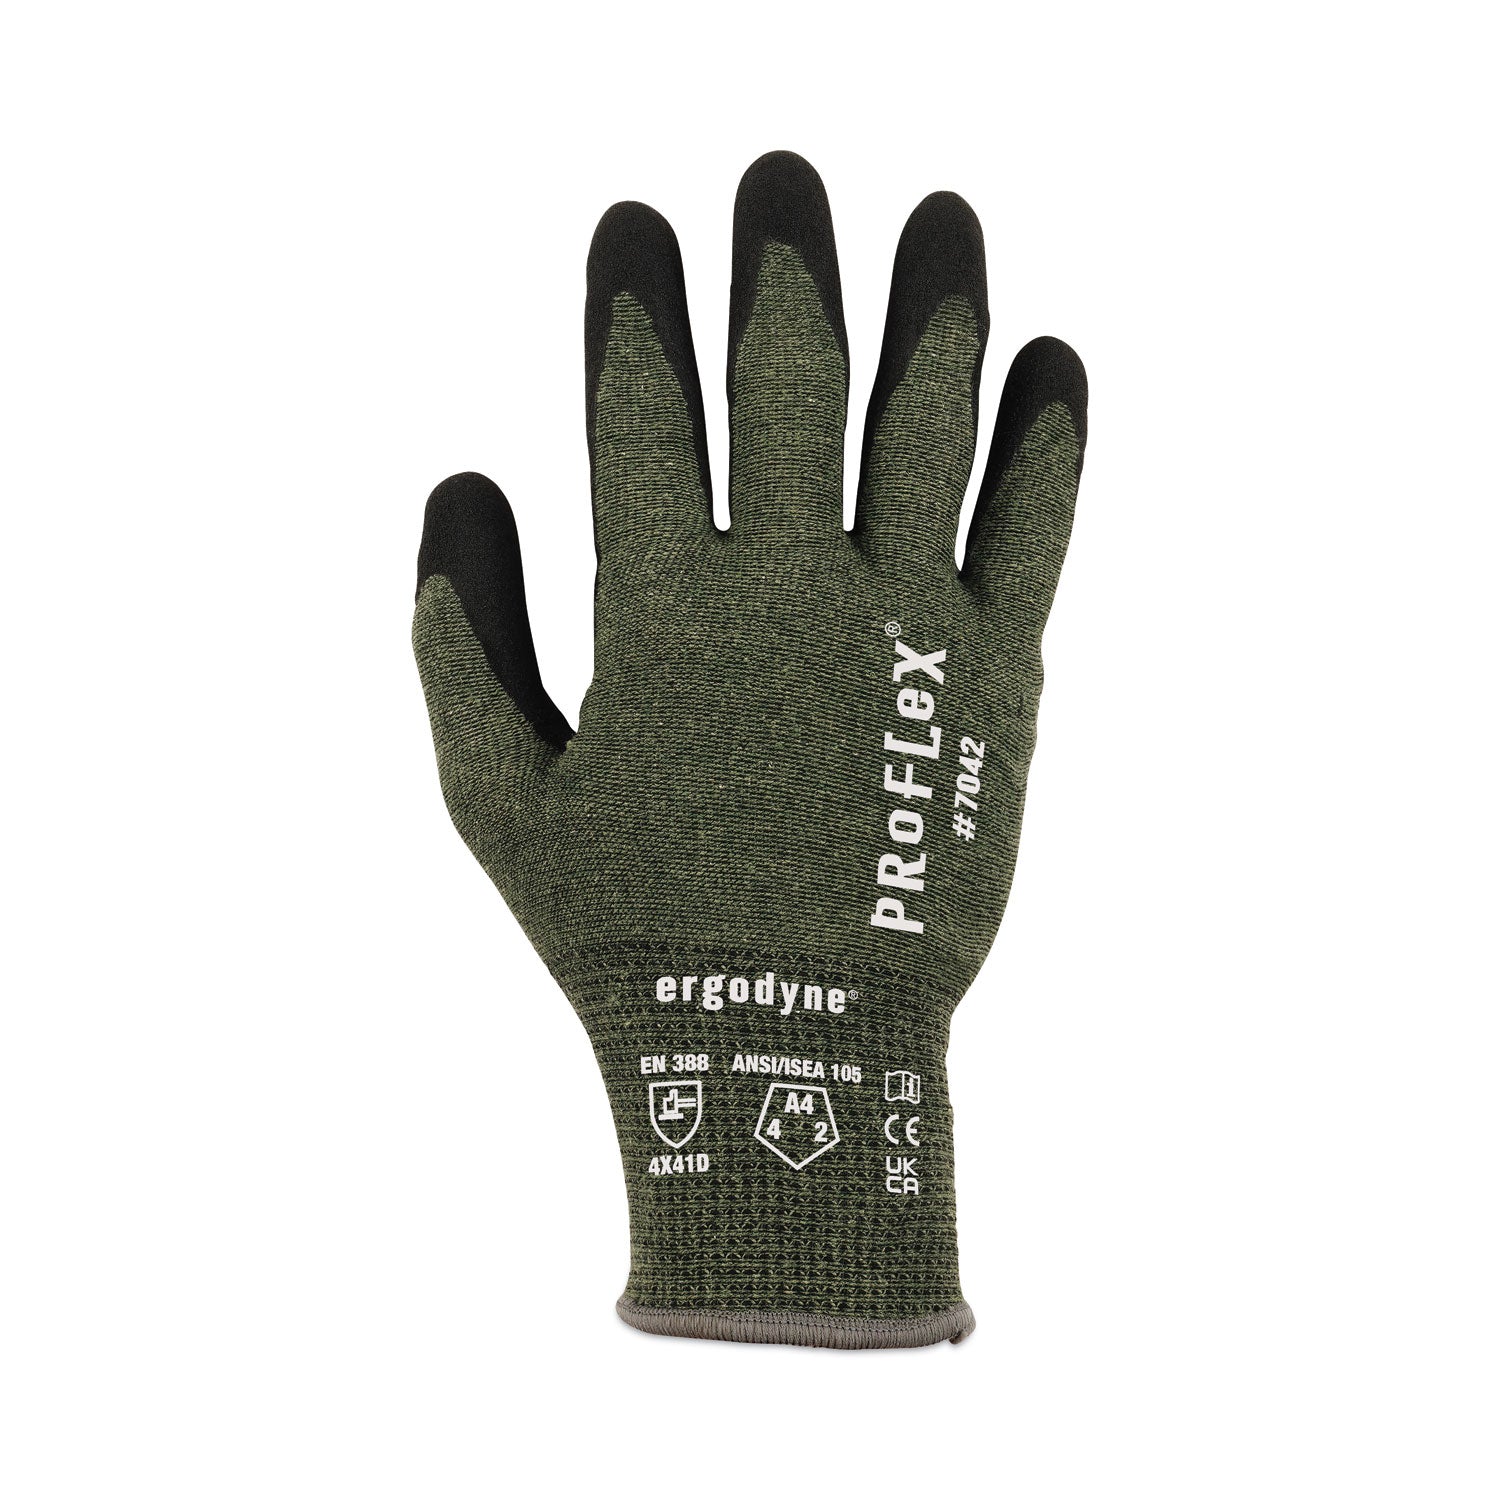 proflex-7042-ansi-a4-nitrile-coated-cr-gloves-green-medium-pair-ships-in-1-3-business-days_ego10343 - 2